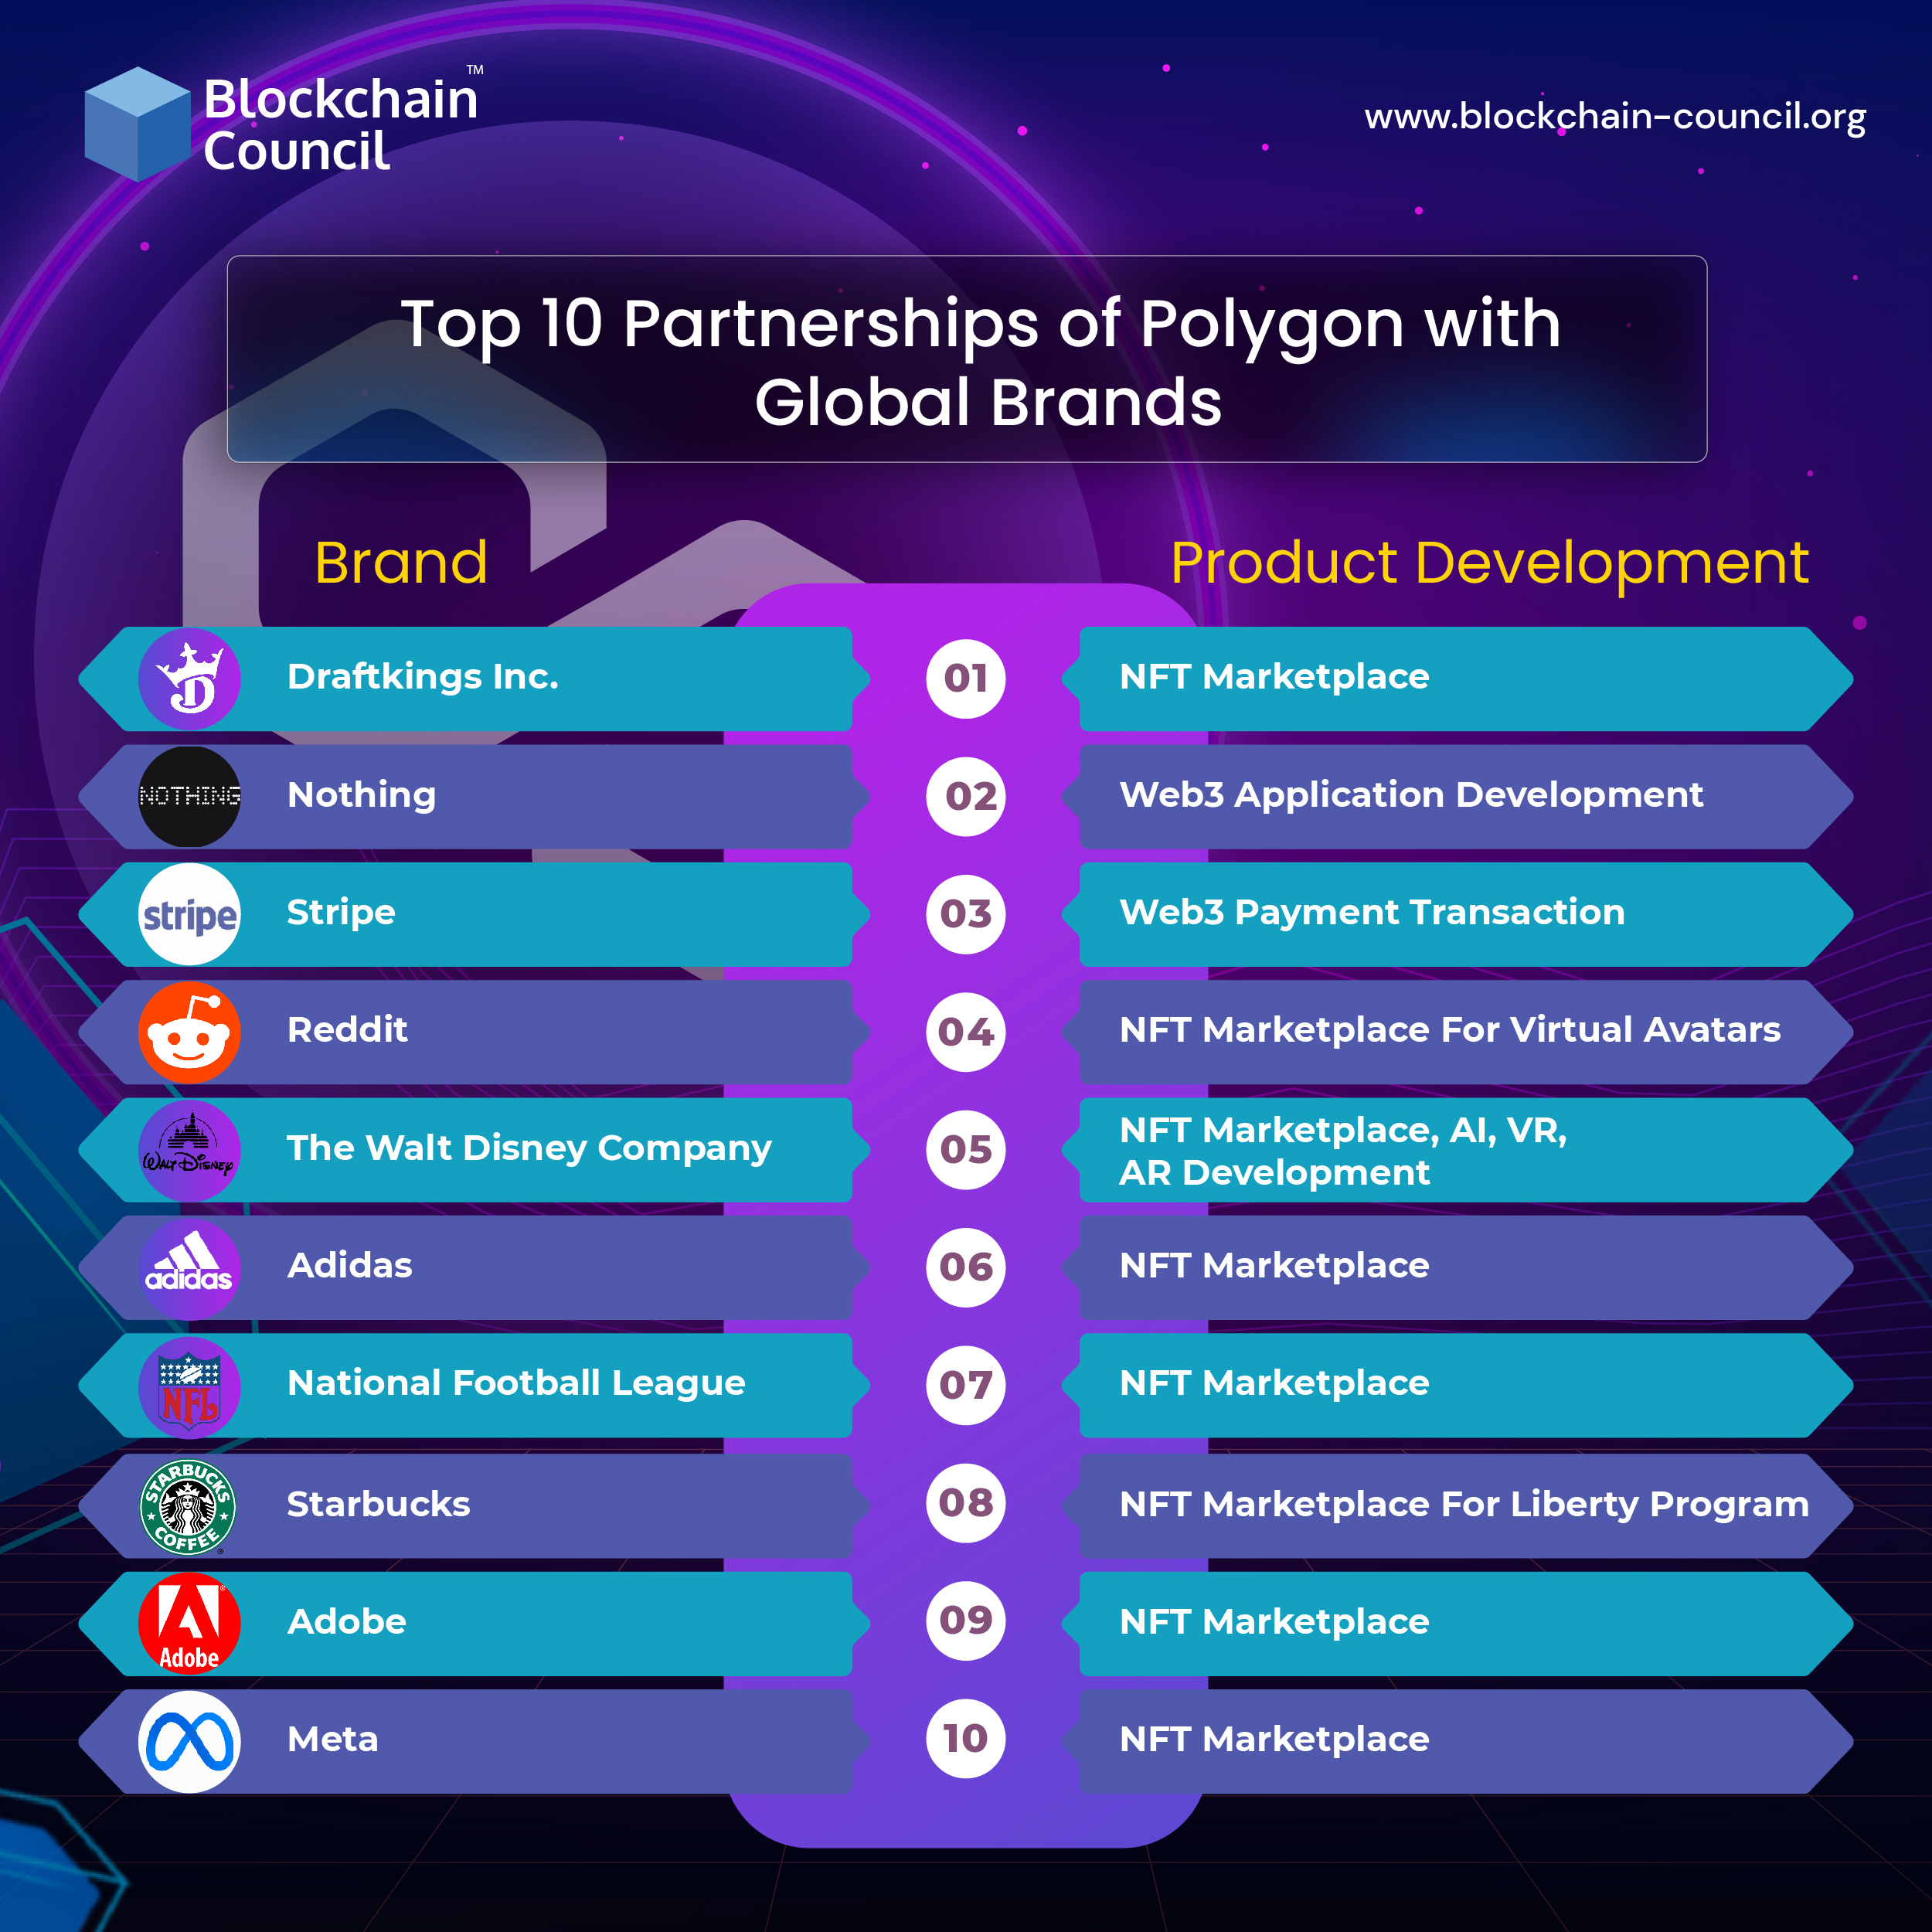 Top 10 Partnerships of Polygon with Global Brands